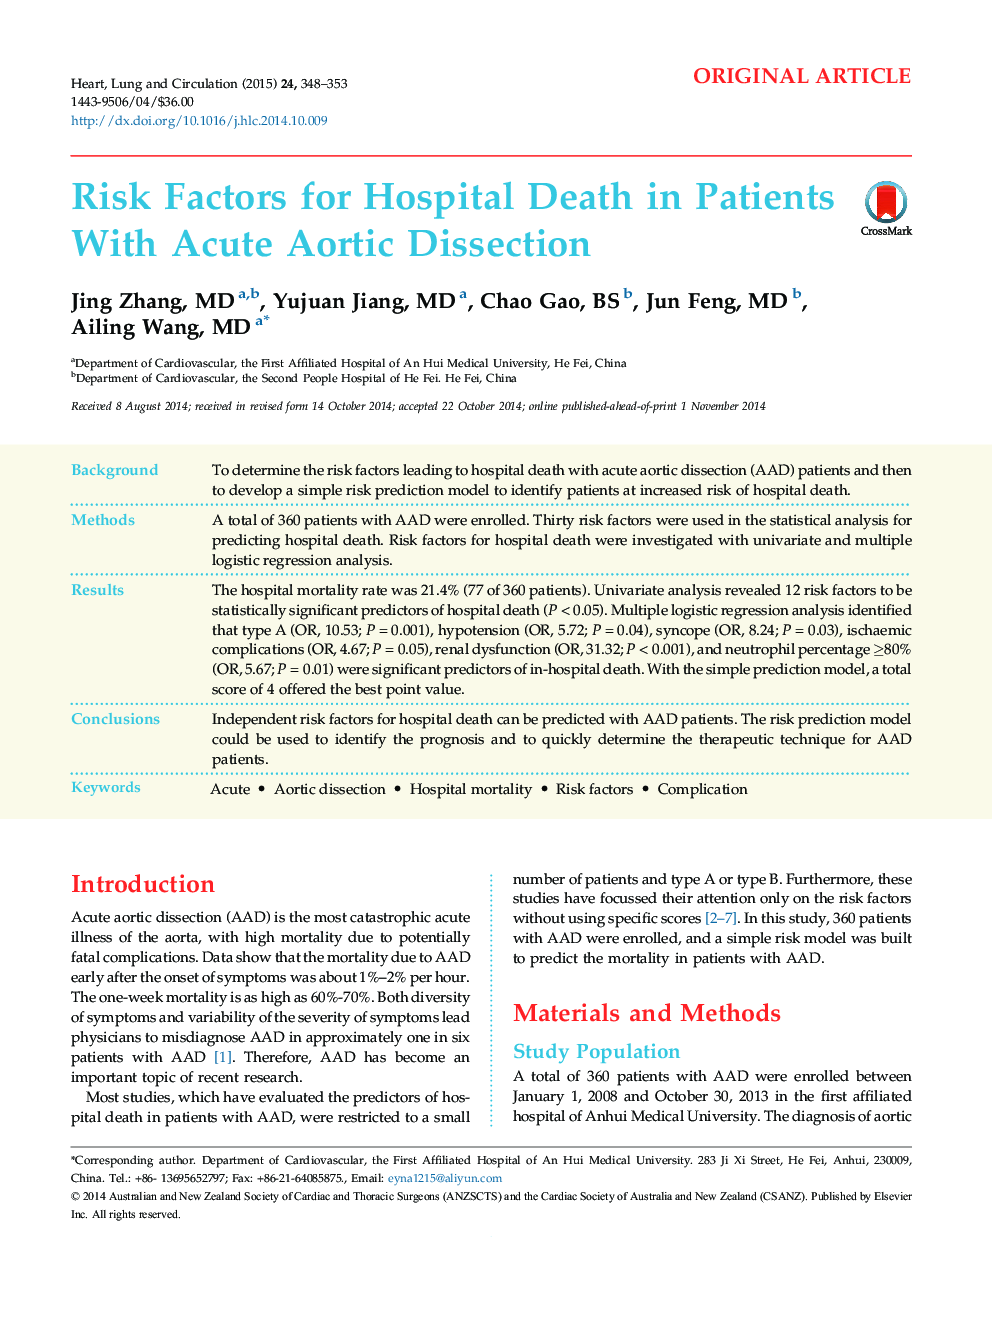 Risk Factors for Hospital Death in Patients With Acute Aortic Dissection